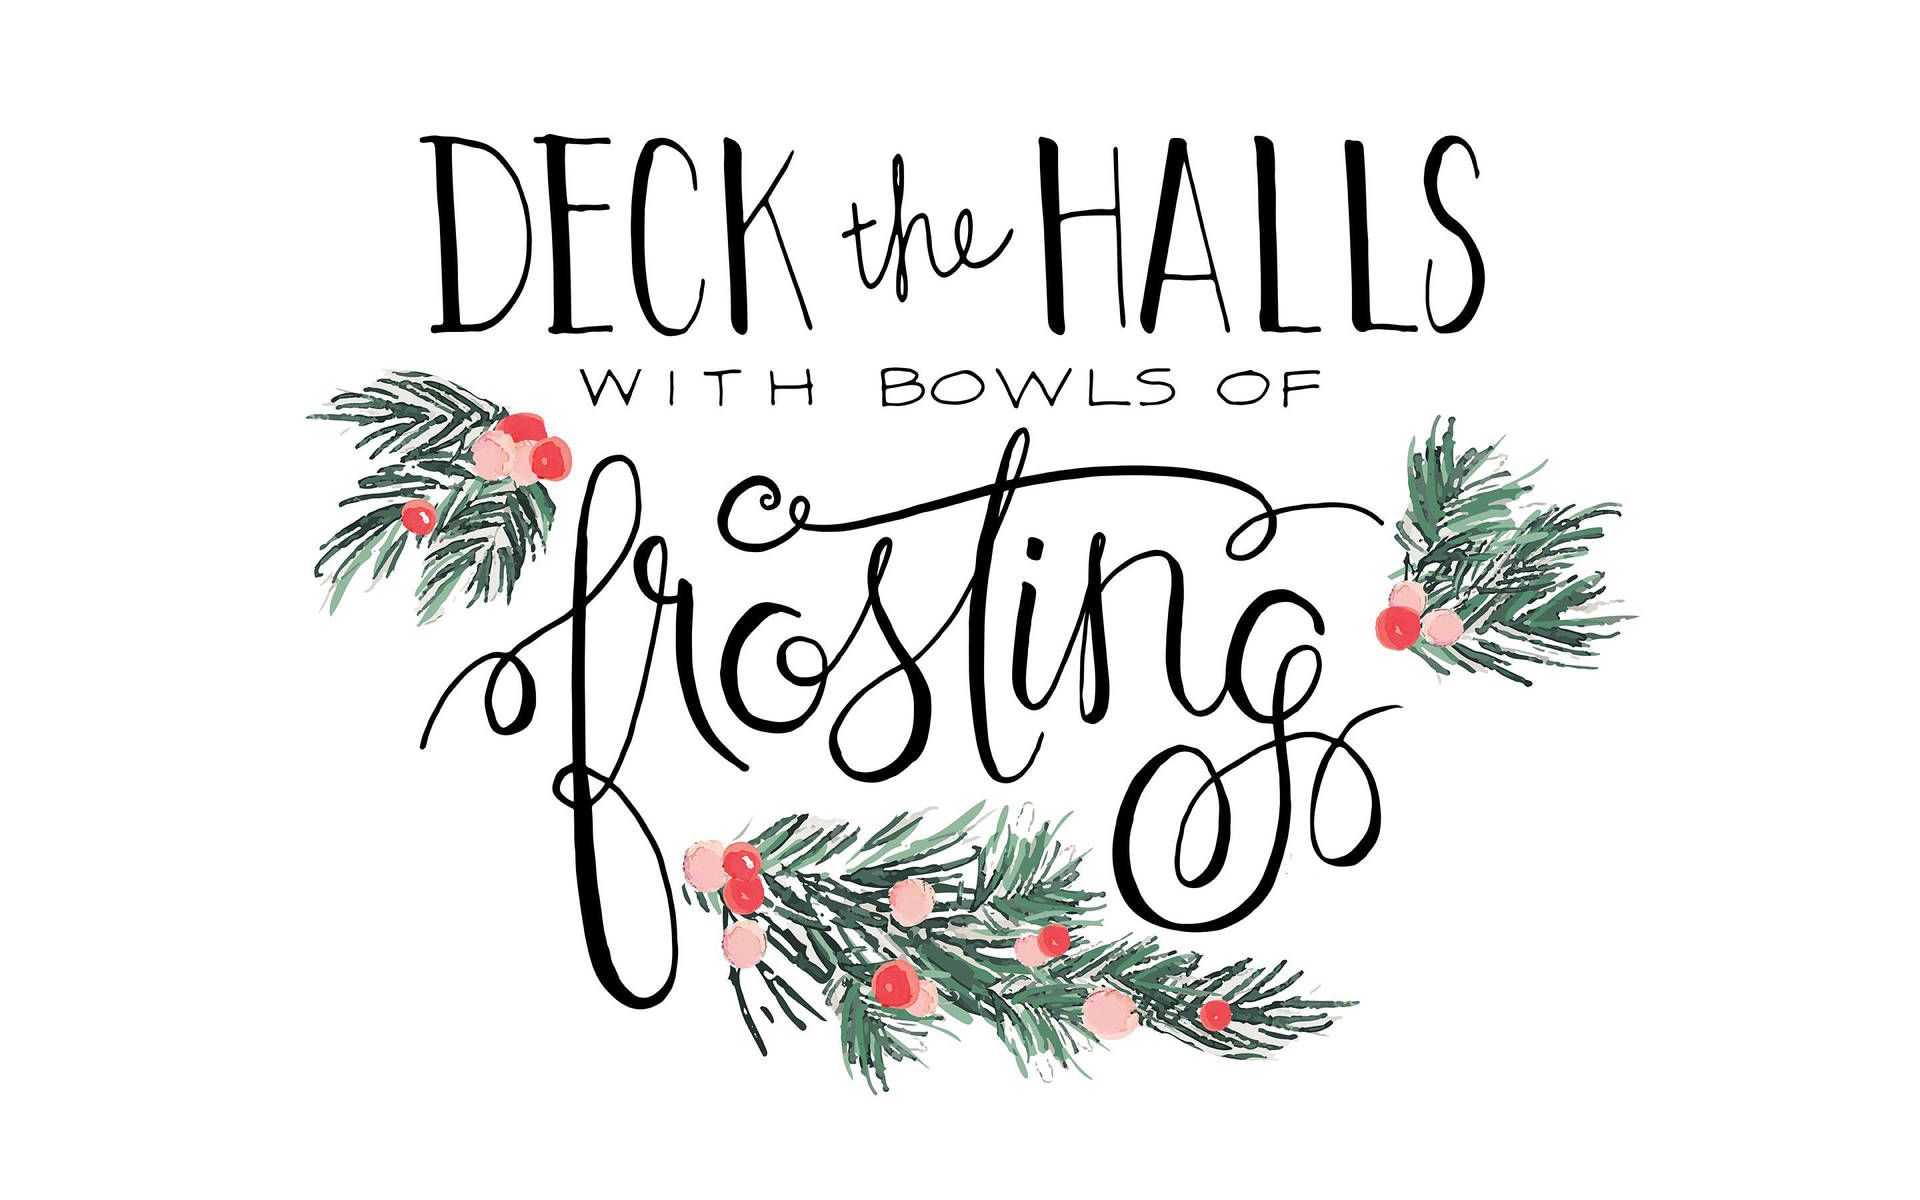 Download Aesthetic iPad Christmas Decor Wallpaper. Deck the halls with bowls of frosting